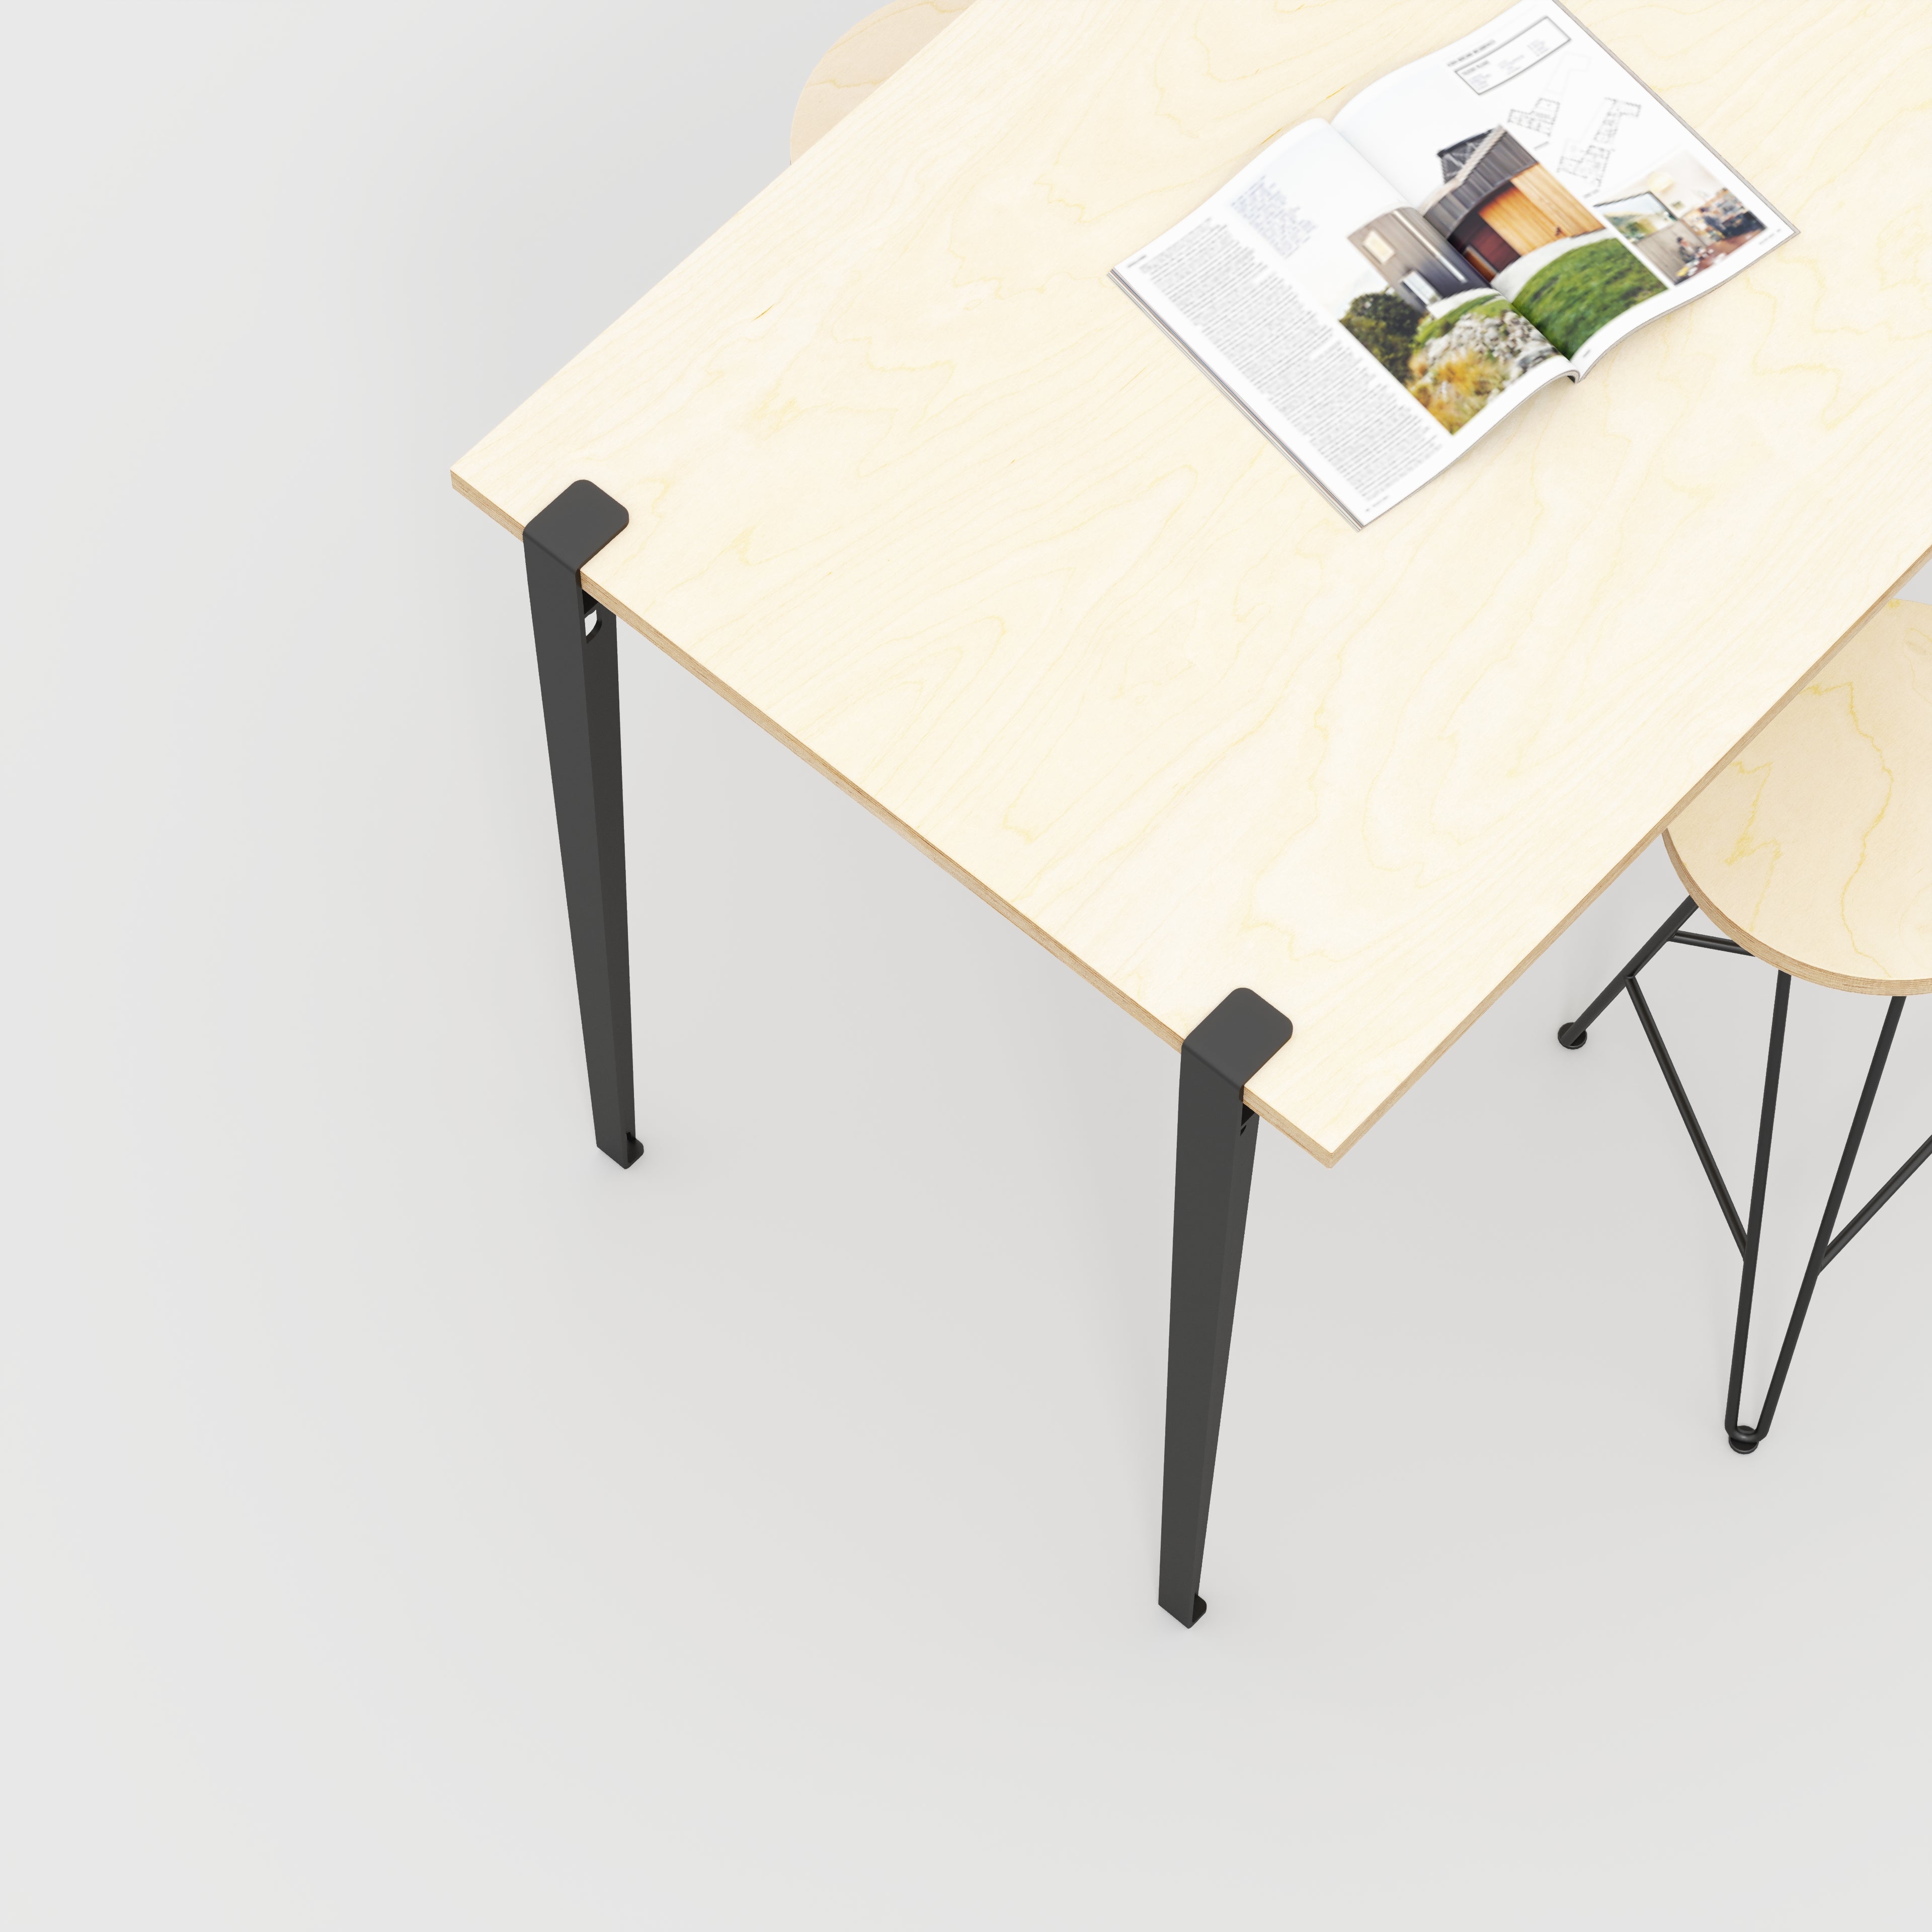 Wall Table with Black Tiptoe Legs and Brackets - Plywood Birch - 1200(w) x 800(d) x 900(h)